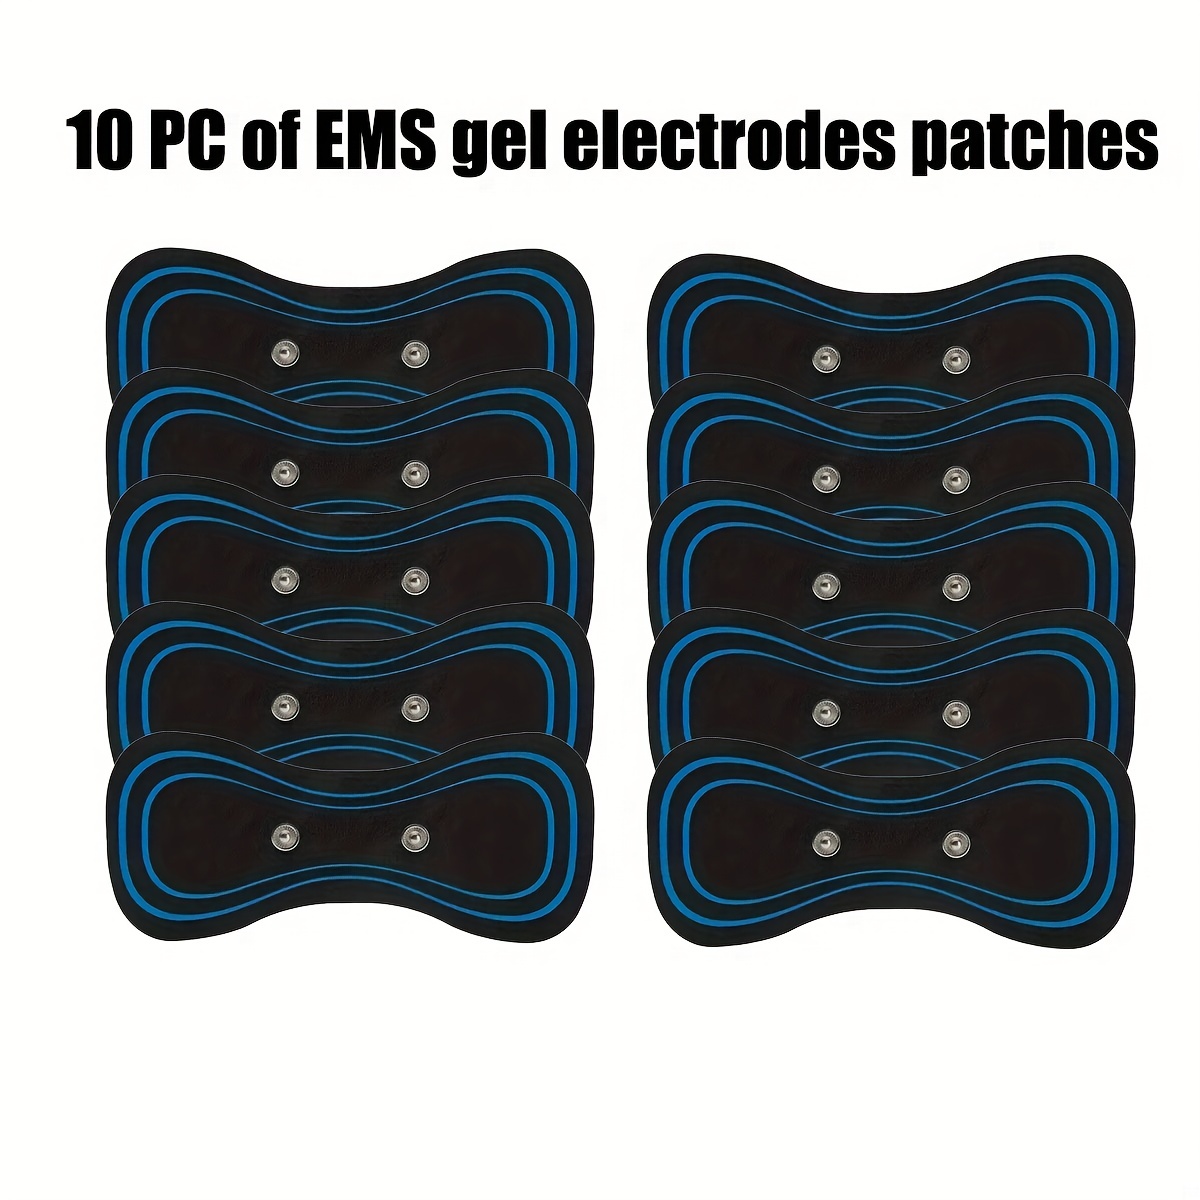 TENKER 2x2 TENS Unit Replacement Pads 24pcs TENKER 3rd Gen Latex-Free  Self-Adhesive Electrotherapy Patches 